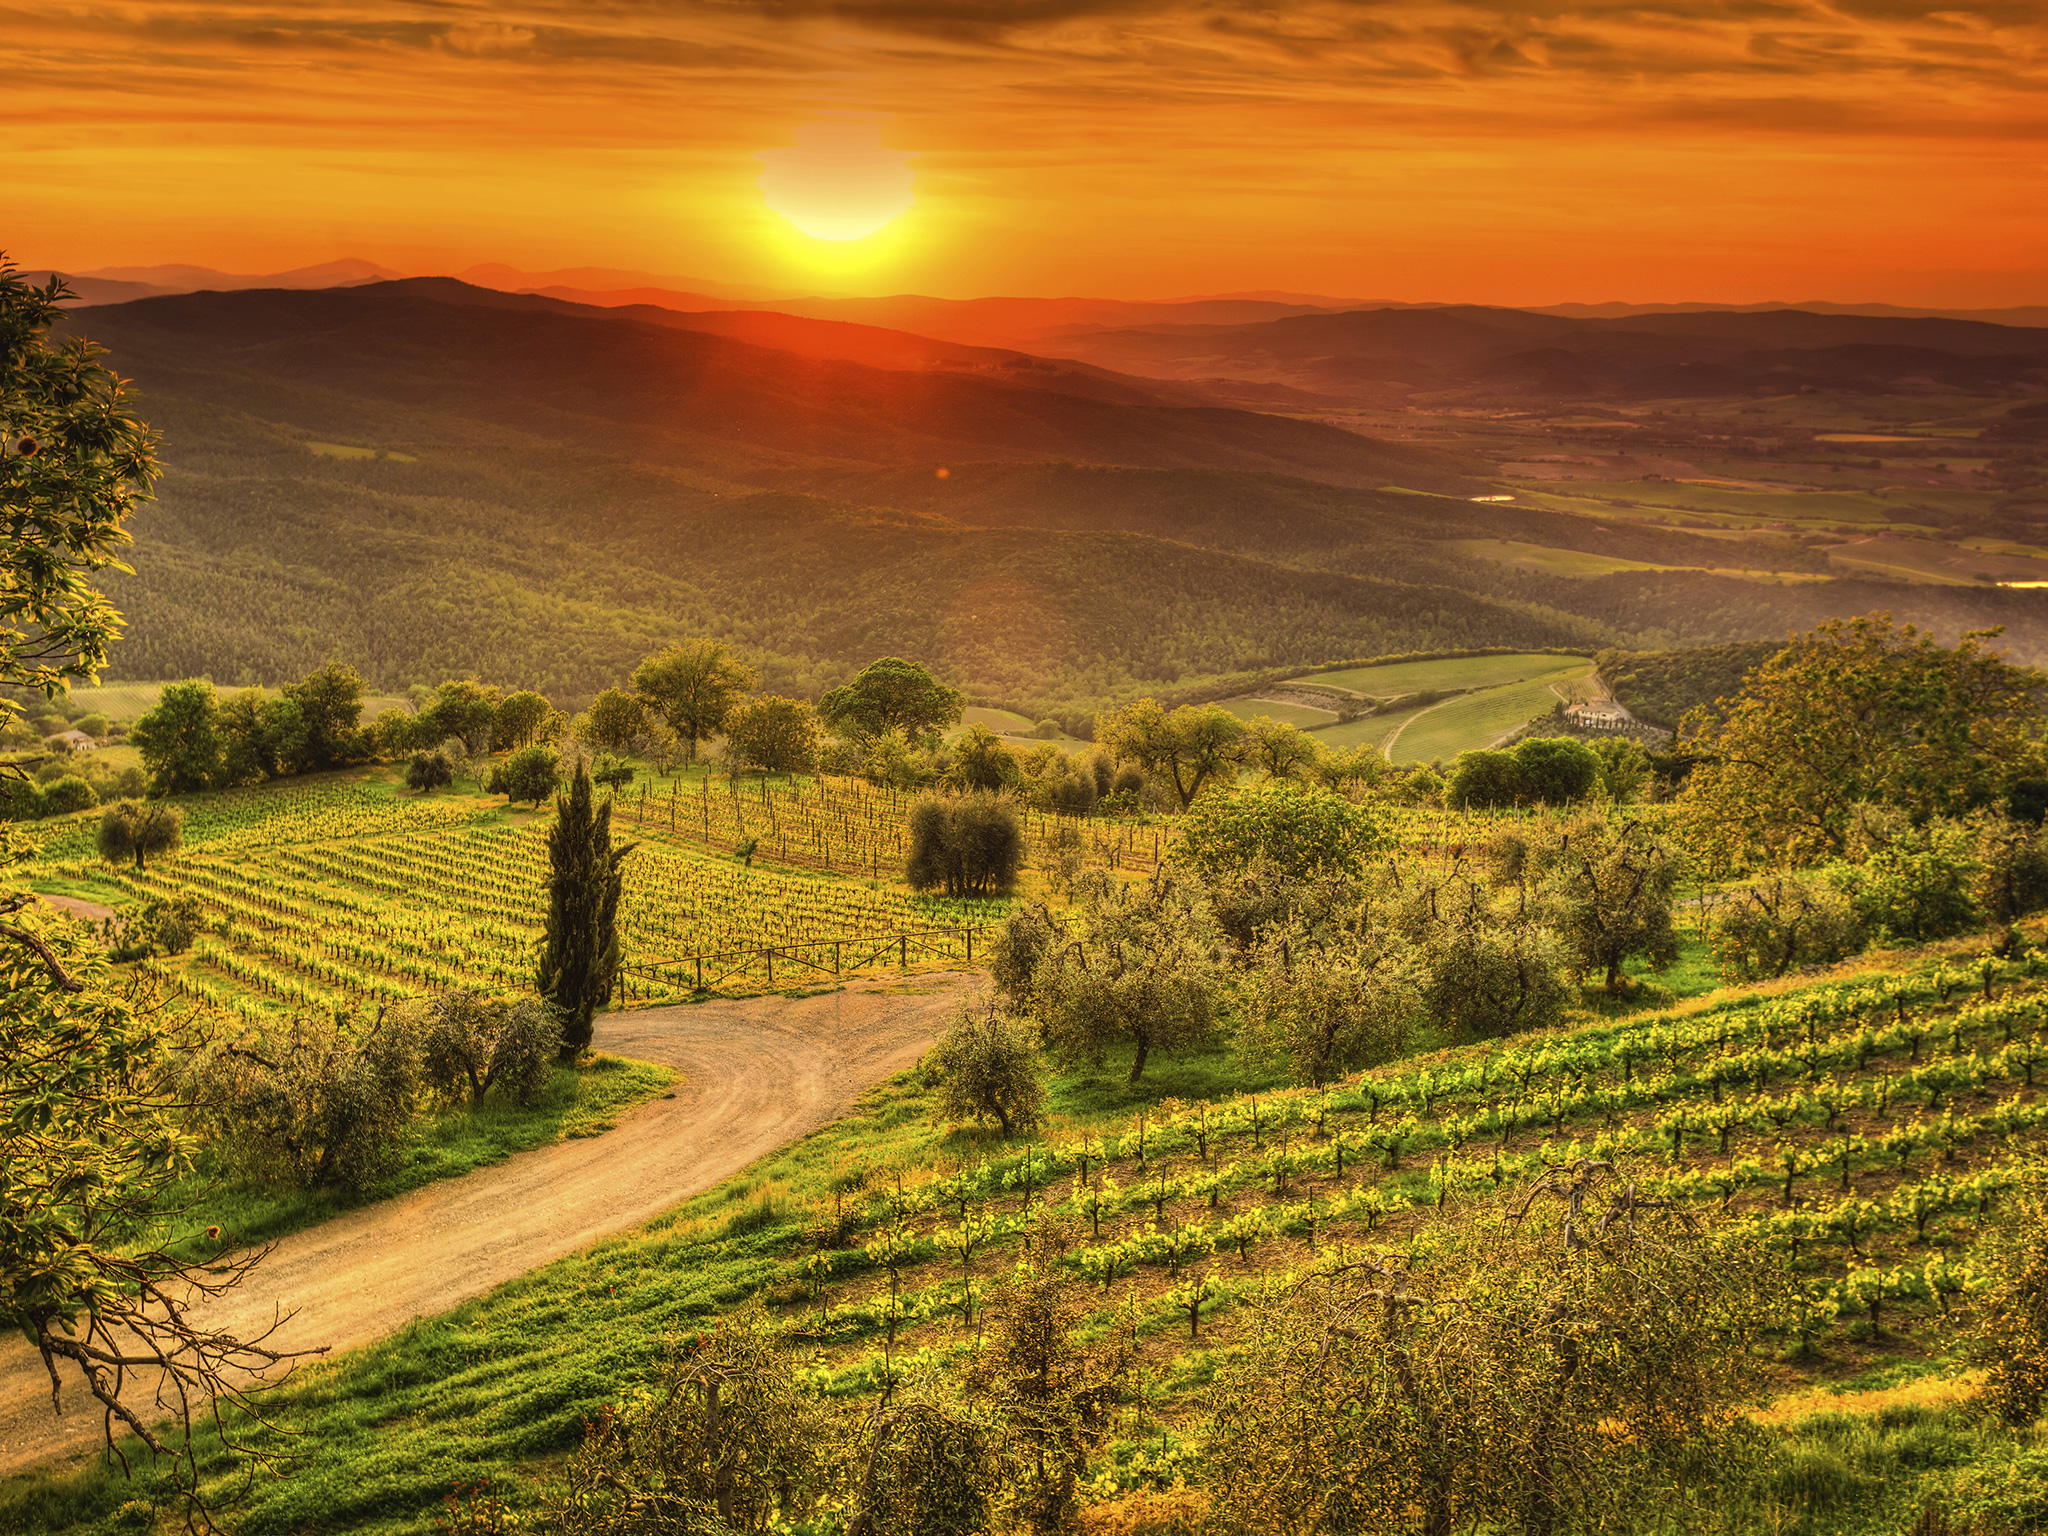 The 10 Most Beautiful Places in Italy | HuffPost